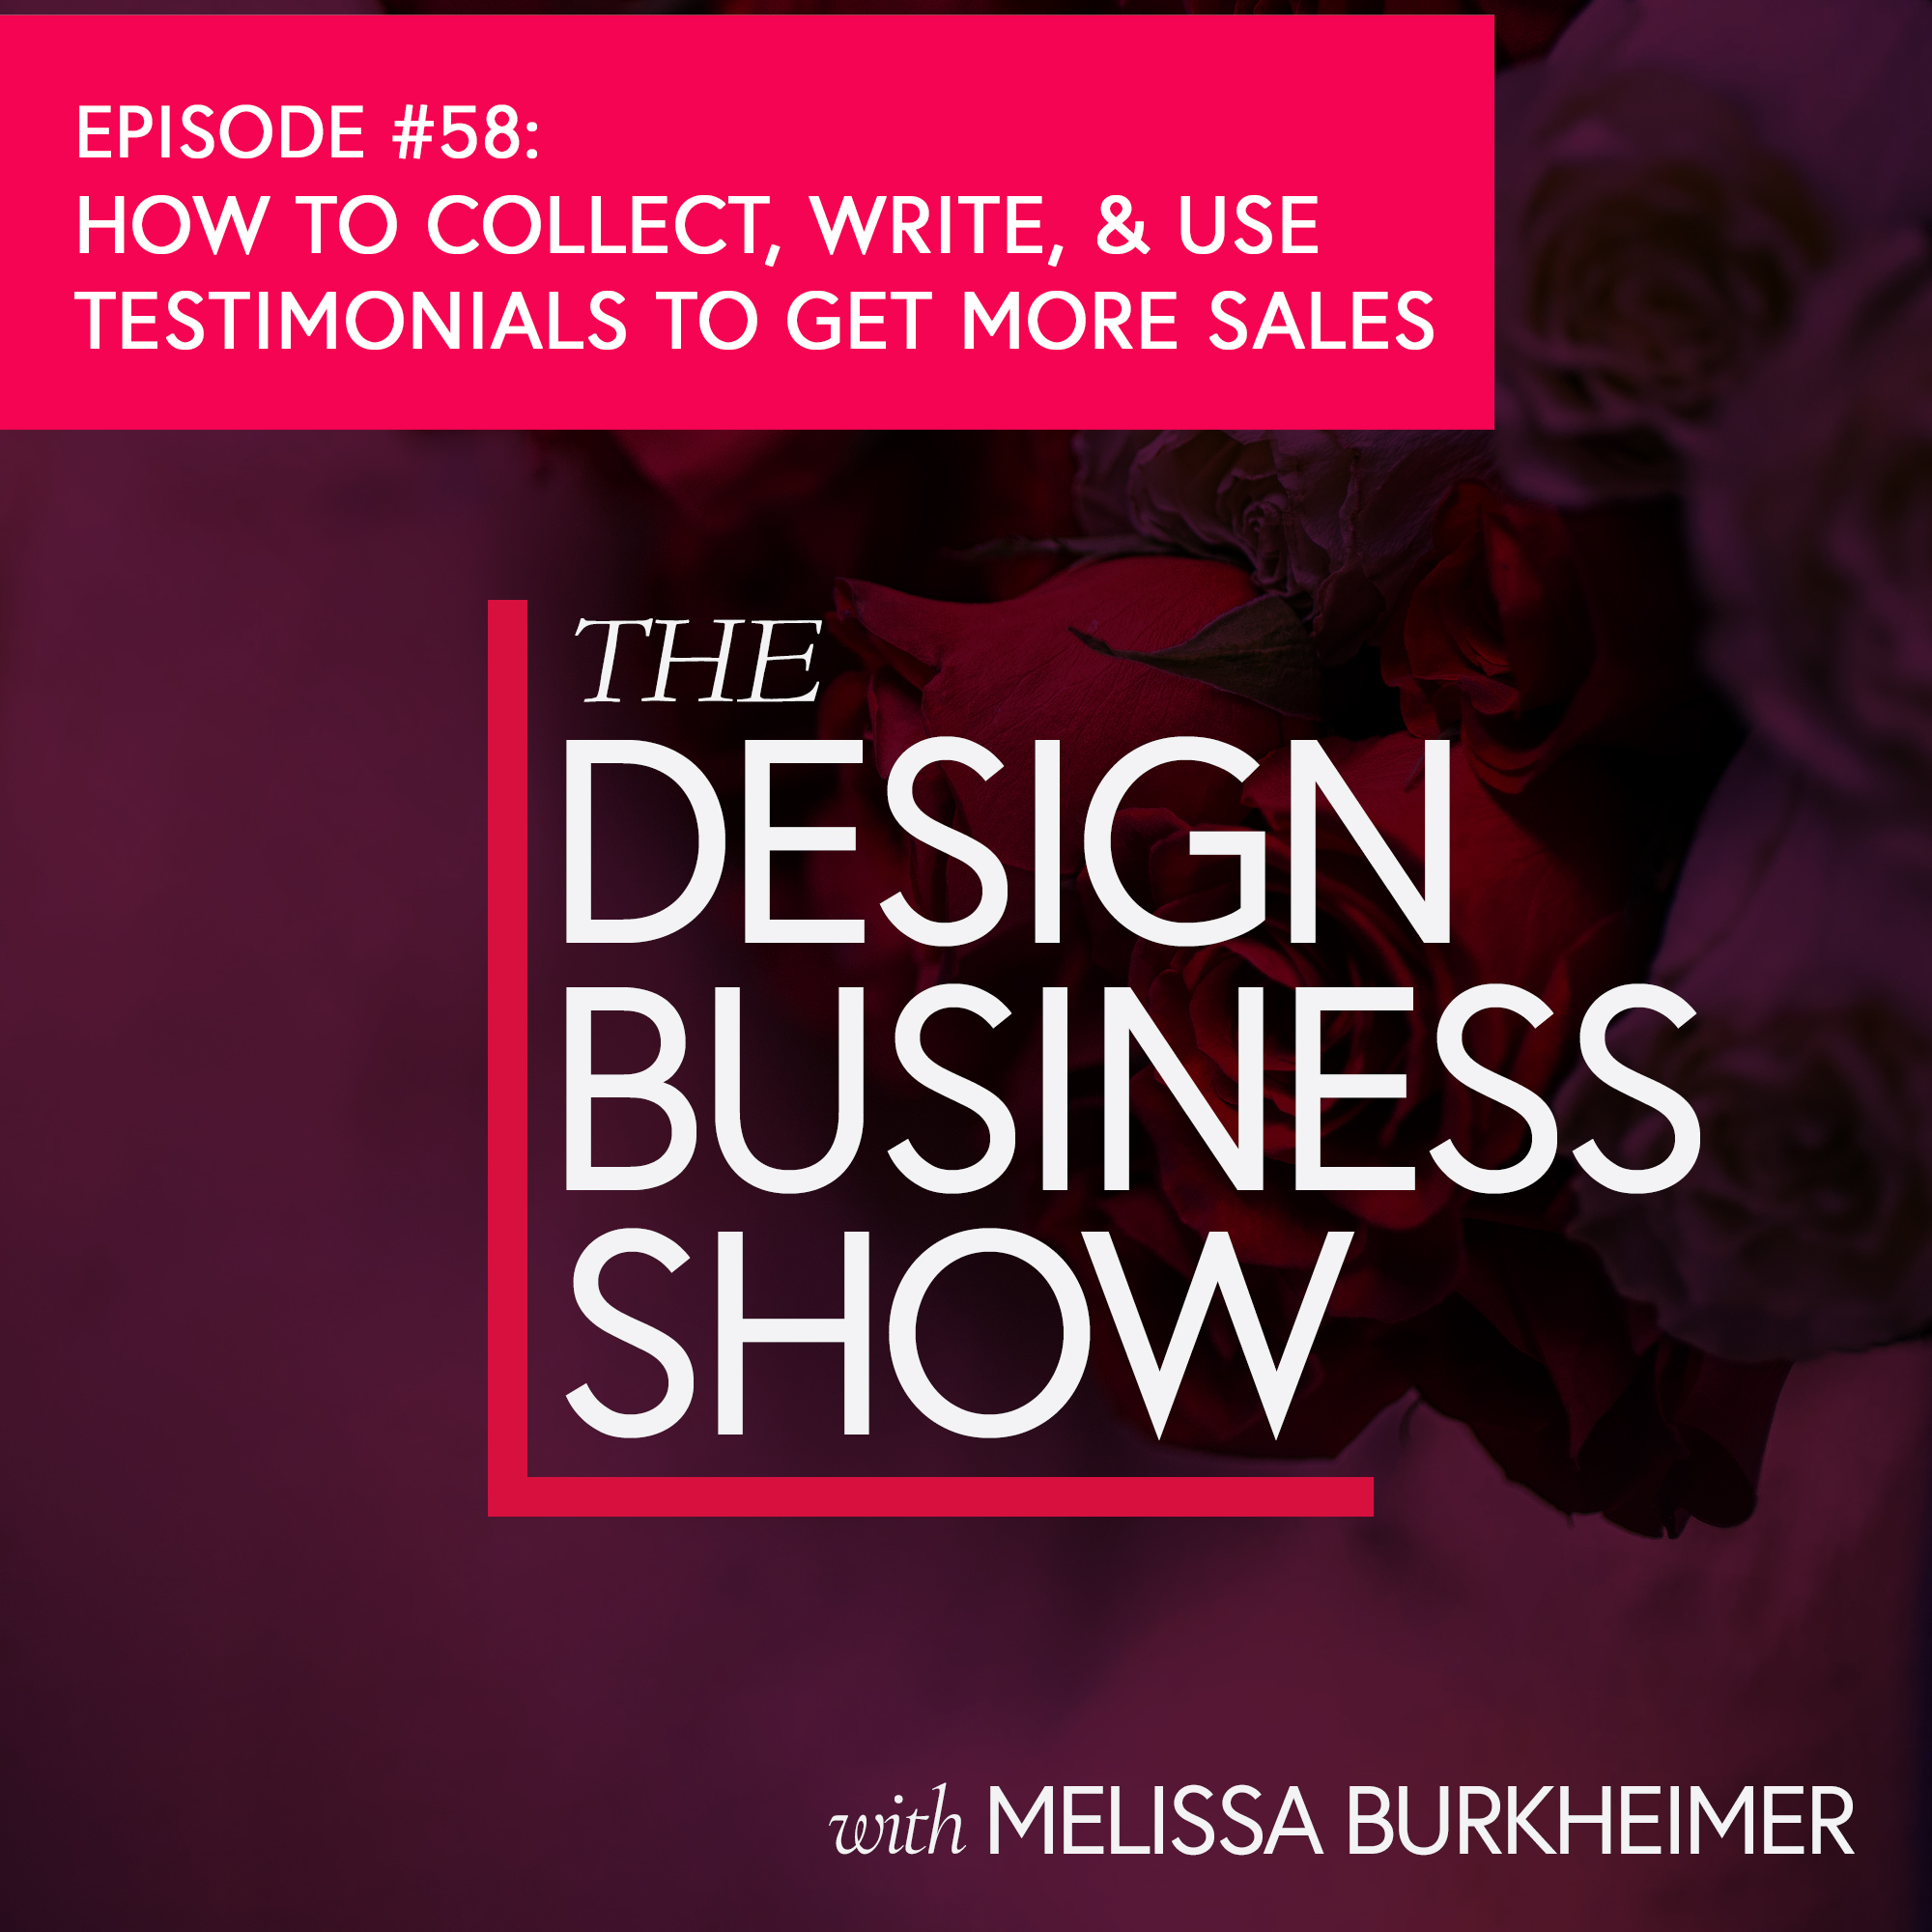 Check out episode 58 of The Design Business Show to learn how to use testimonials strategically in your business.